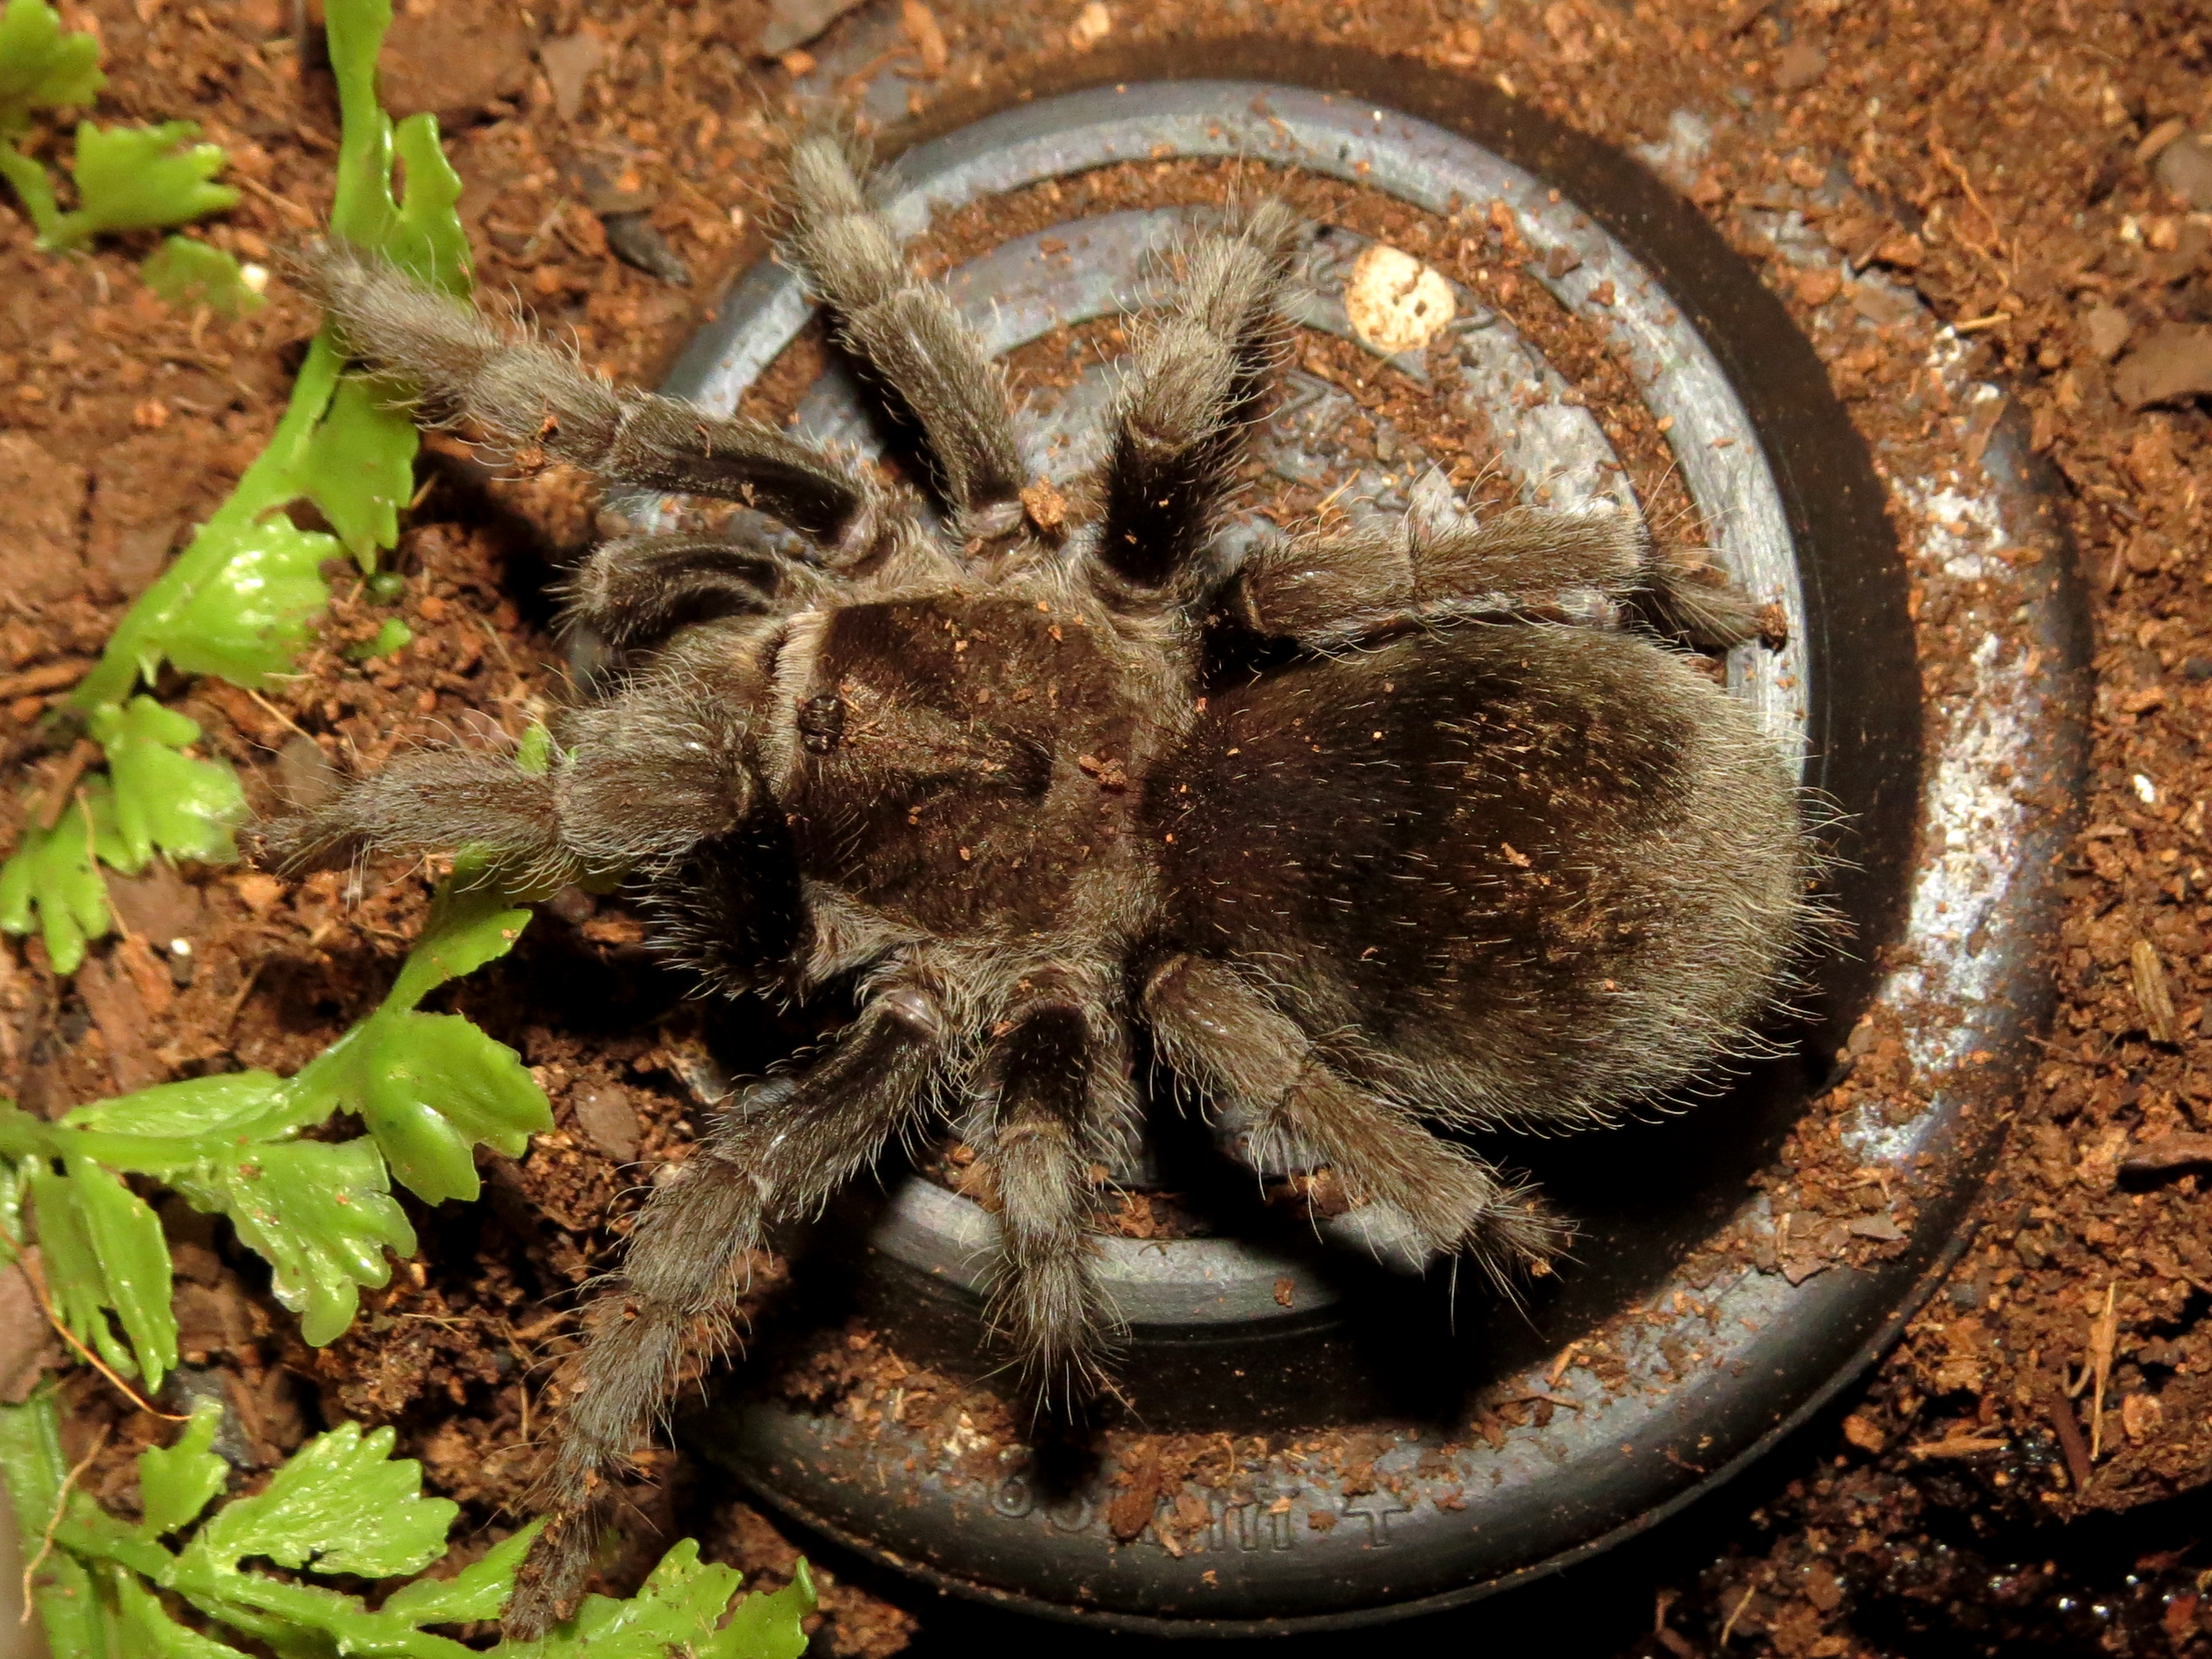 Up on the Roof (♀ Grammostola pulchra 3.5")